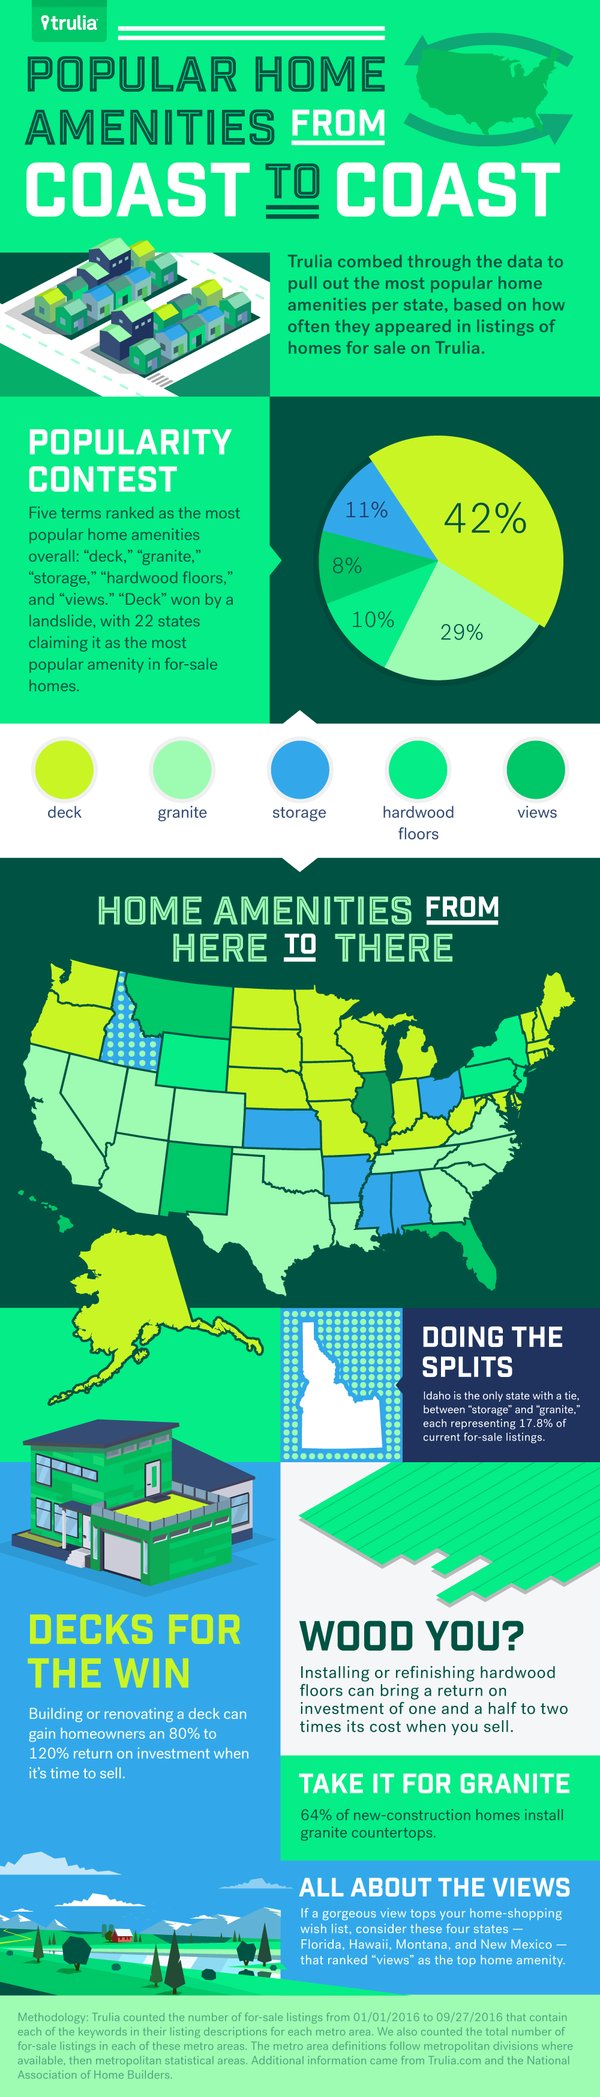 House-Hunters-What-Homebuyers-Want-In-Every-State-10-26-Infographic-Update.png